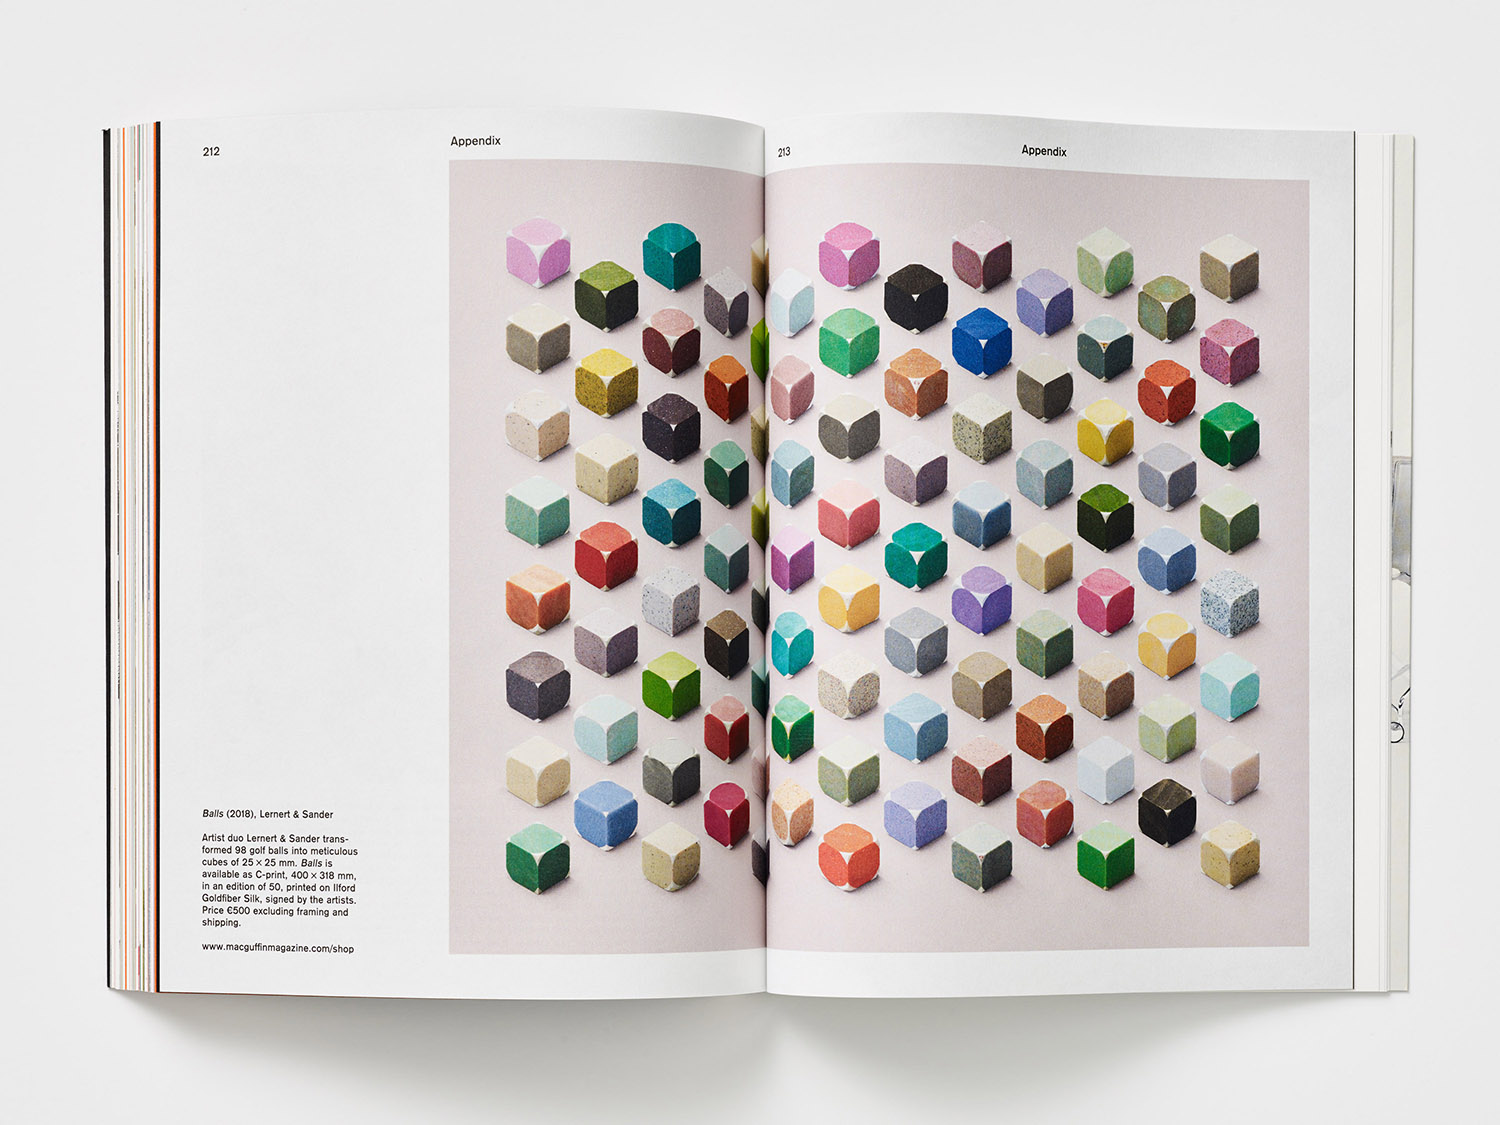 Magazine and editorial design by Sandra Kassenaar for MacGuffin